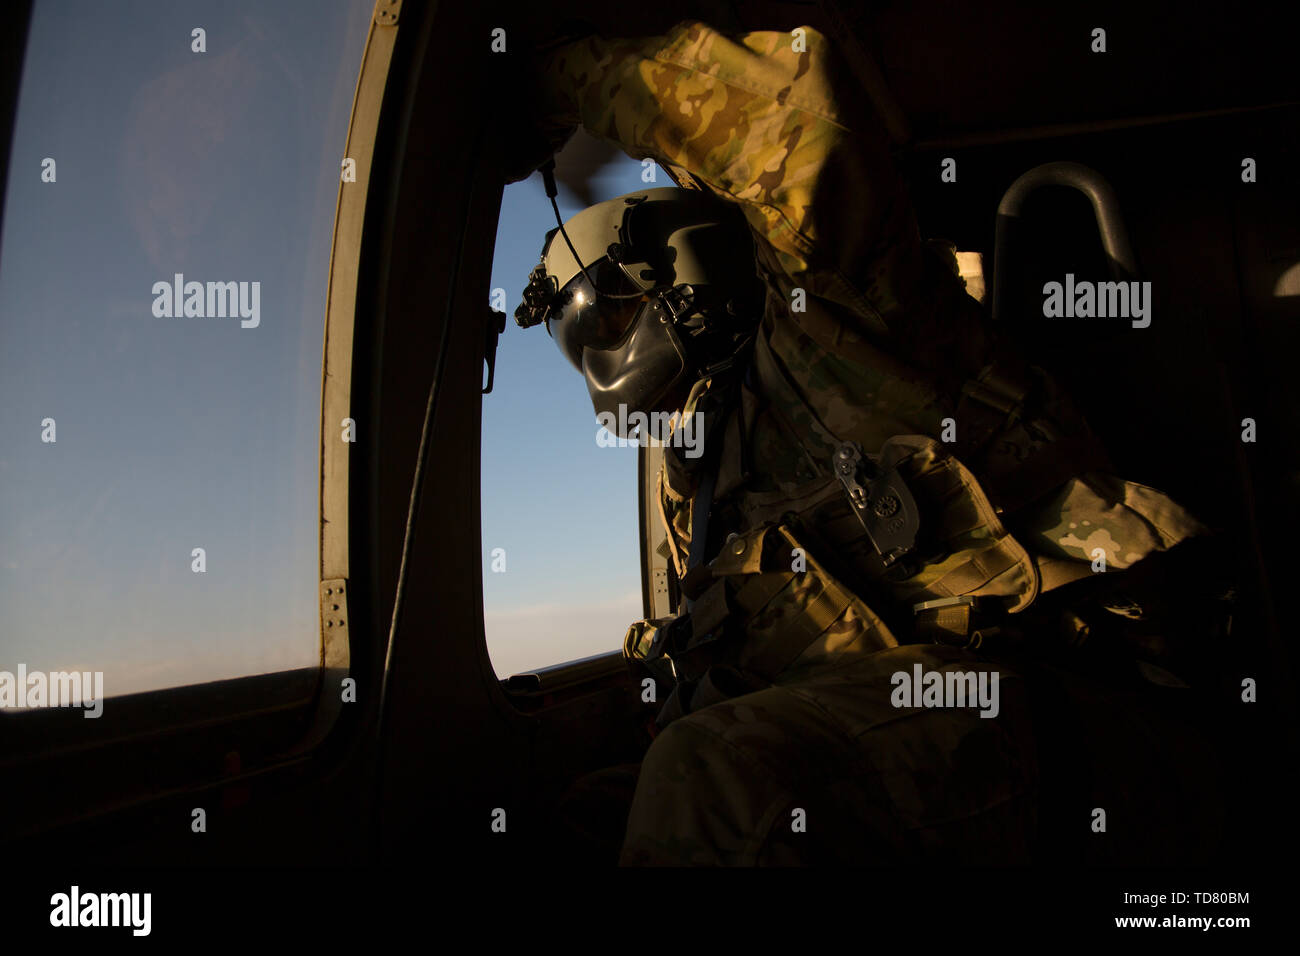 Dahlke, Afghanistan. 17th Oct, 2018. A Crew Chief, the pilot's eyes for the side of the helicopter, keeps watch out of a Blackhawk UH-60 during dusk.FOB(forward operating base) Dahlke is a new austere US Army base, as of Spring 2018, in Afghanistan that began with a large presence of soldiers from the 101st Combat Aviation Brigade. Dahlke is strategically located about 60 miles South of Kabul. Every type of air support mission is done from here, from medevac to resupply to combat. Dahlke was built from the ground up over the past year by the soldiers stationed here. It is built on the So Stock Photo